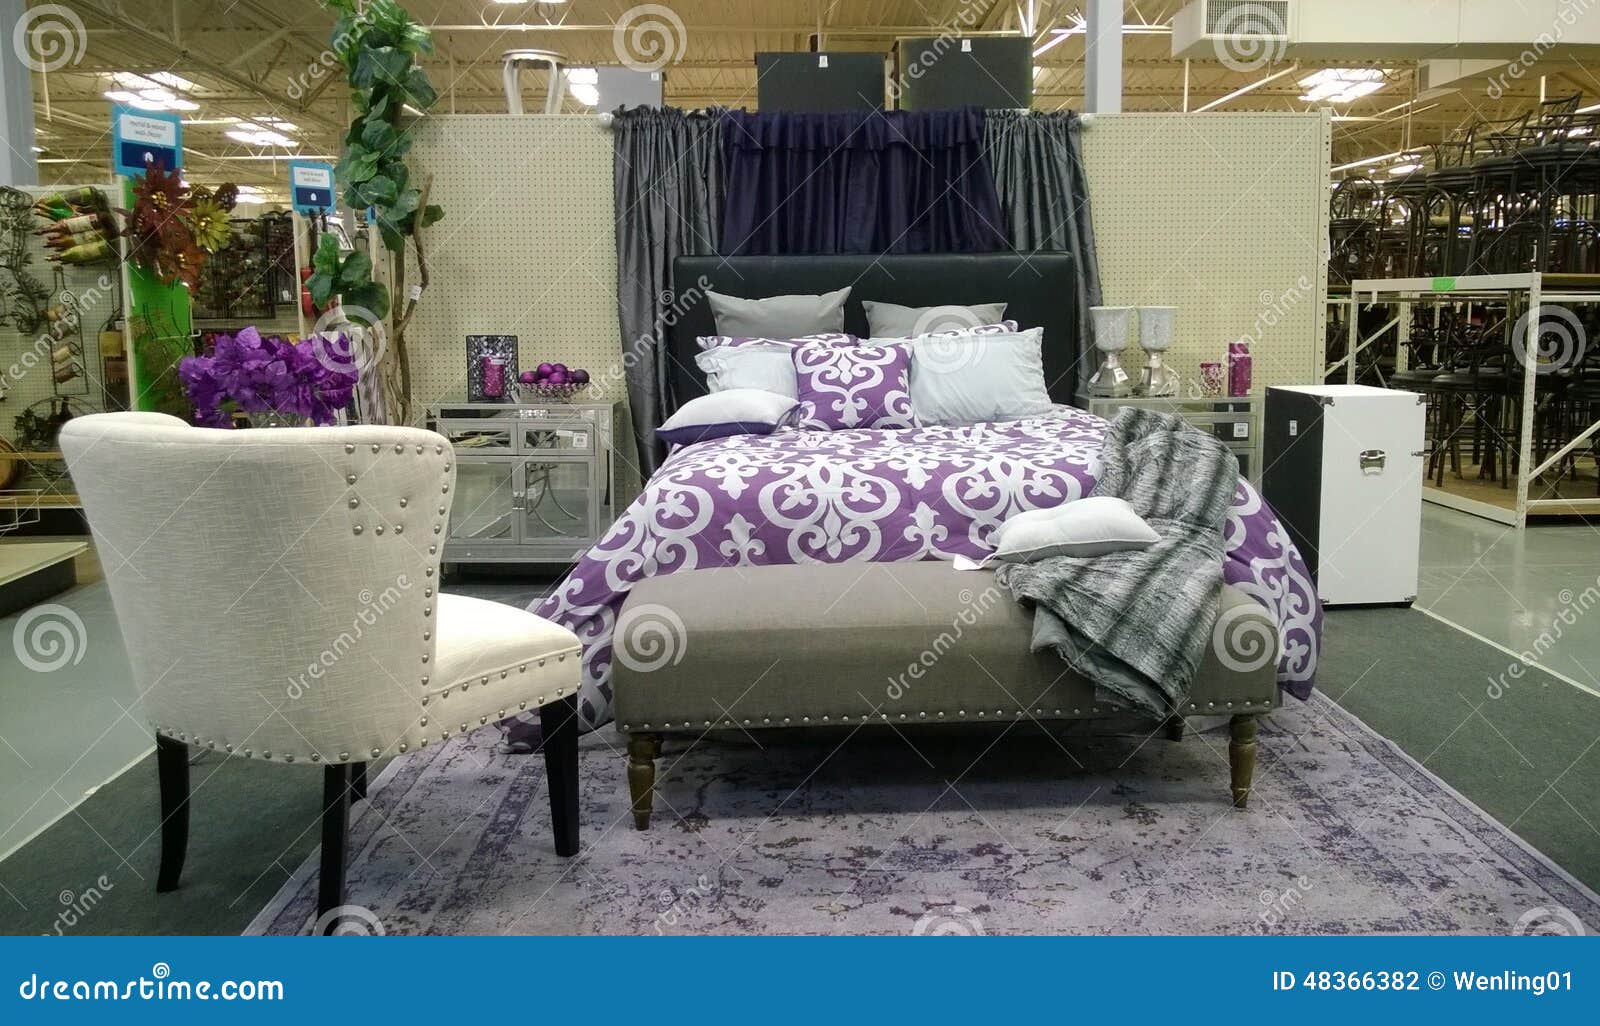 Home Furnishing Store Editorial Photography Image Of Items 48366382